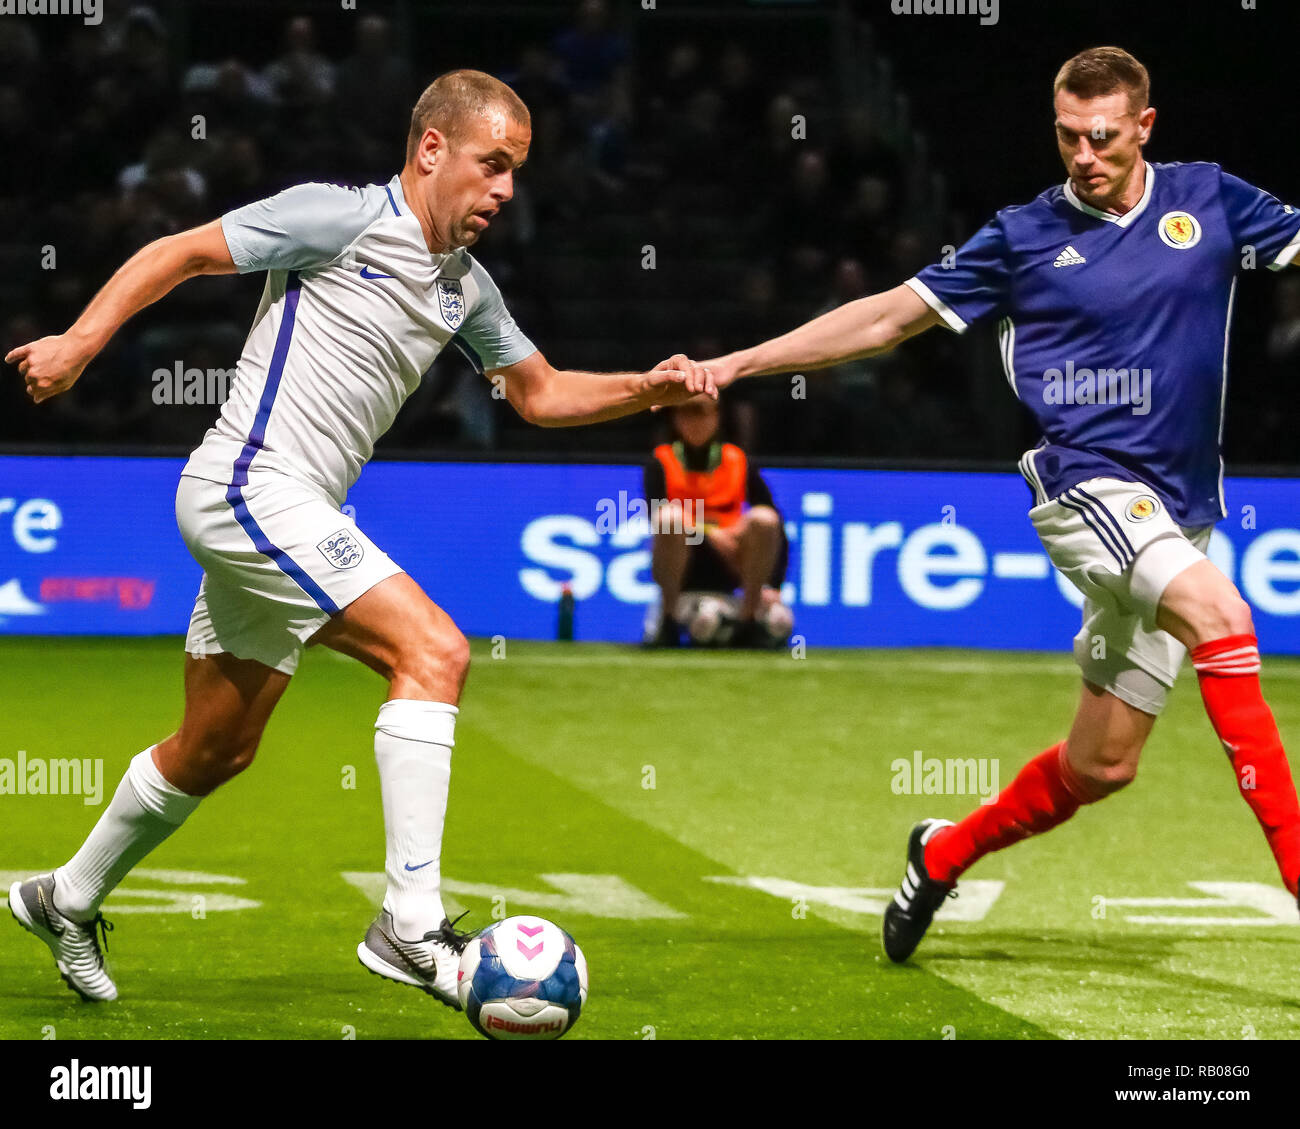 Glasgow, UK. 5th Jan 2019. Action from Day 2 of the FansBet Star Sixes Tournament at the SSE Hydro in Glasgow.   Game 6 - England Vs Scotland Joe Cole in possession during the Star Sixes Tournament in Glasgow Credit: Colin Poultney/Alamy Live News Stock Photo